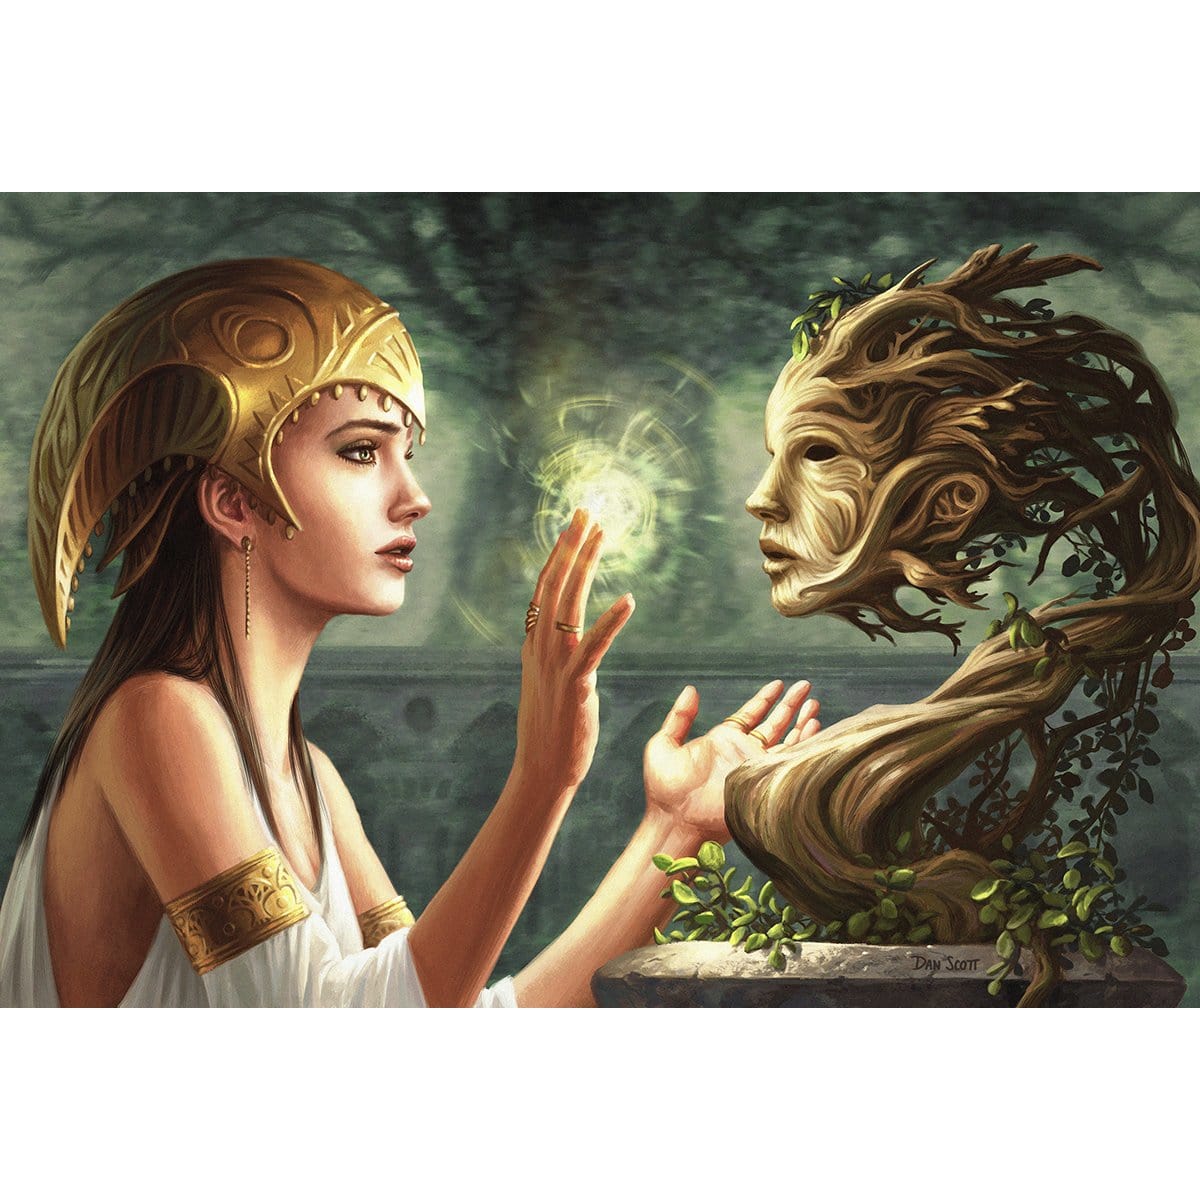 Druid's Deliverance Print - Print - Original Magic Art - Accessories for Magic the Gathering and other card games